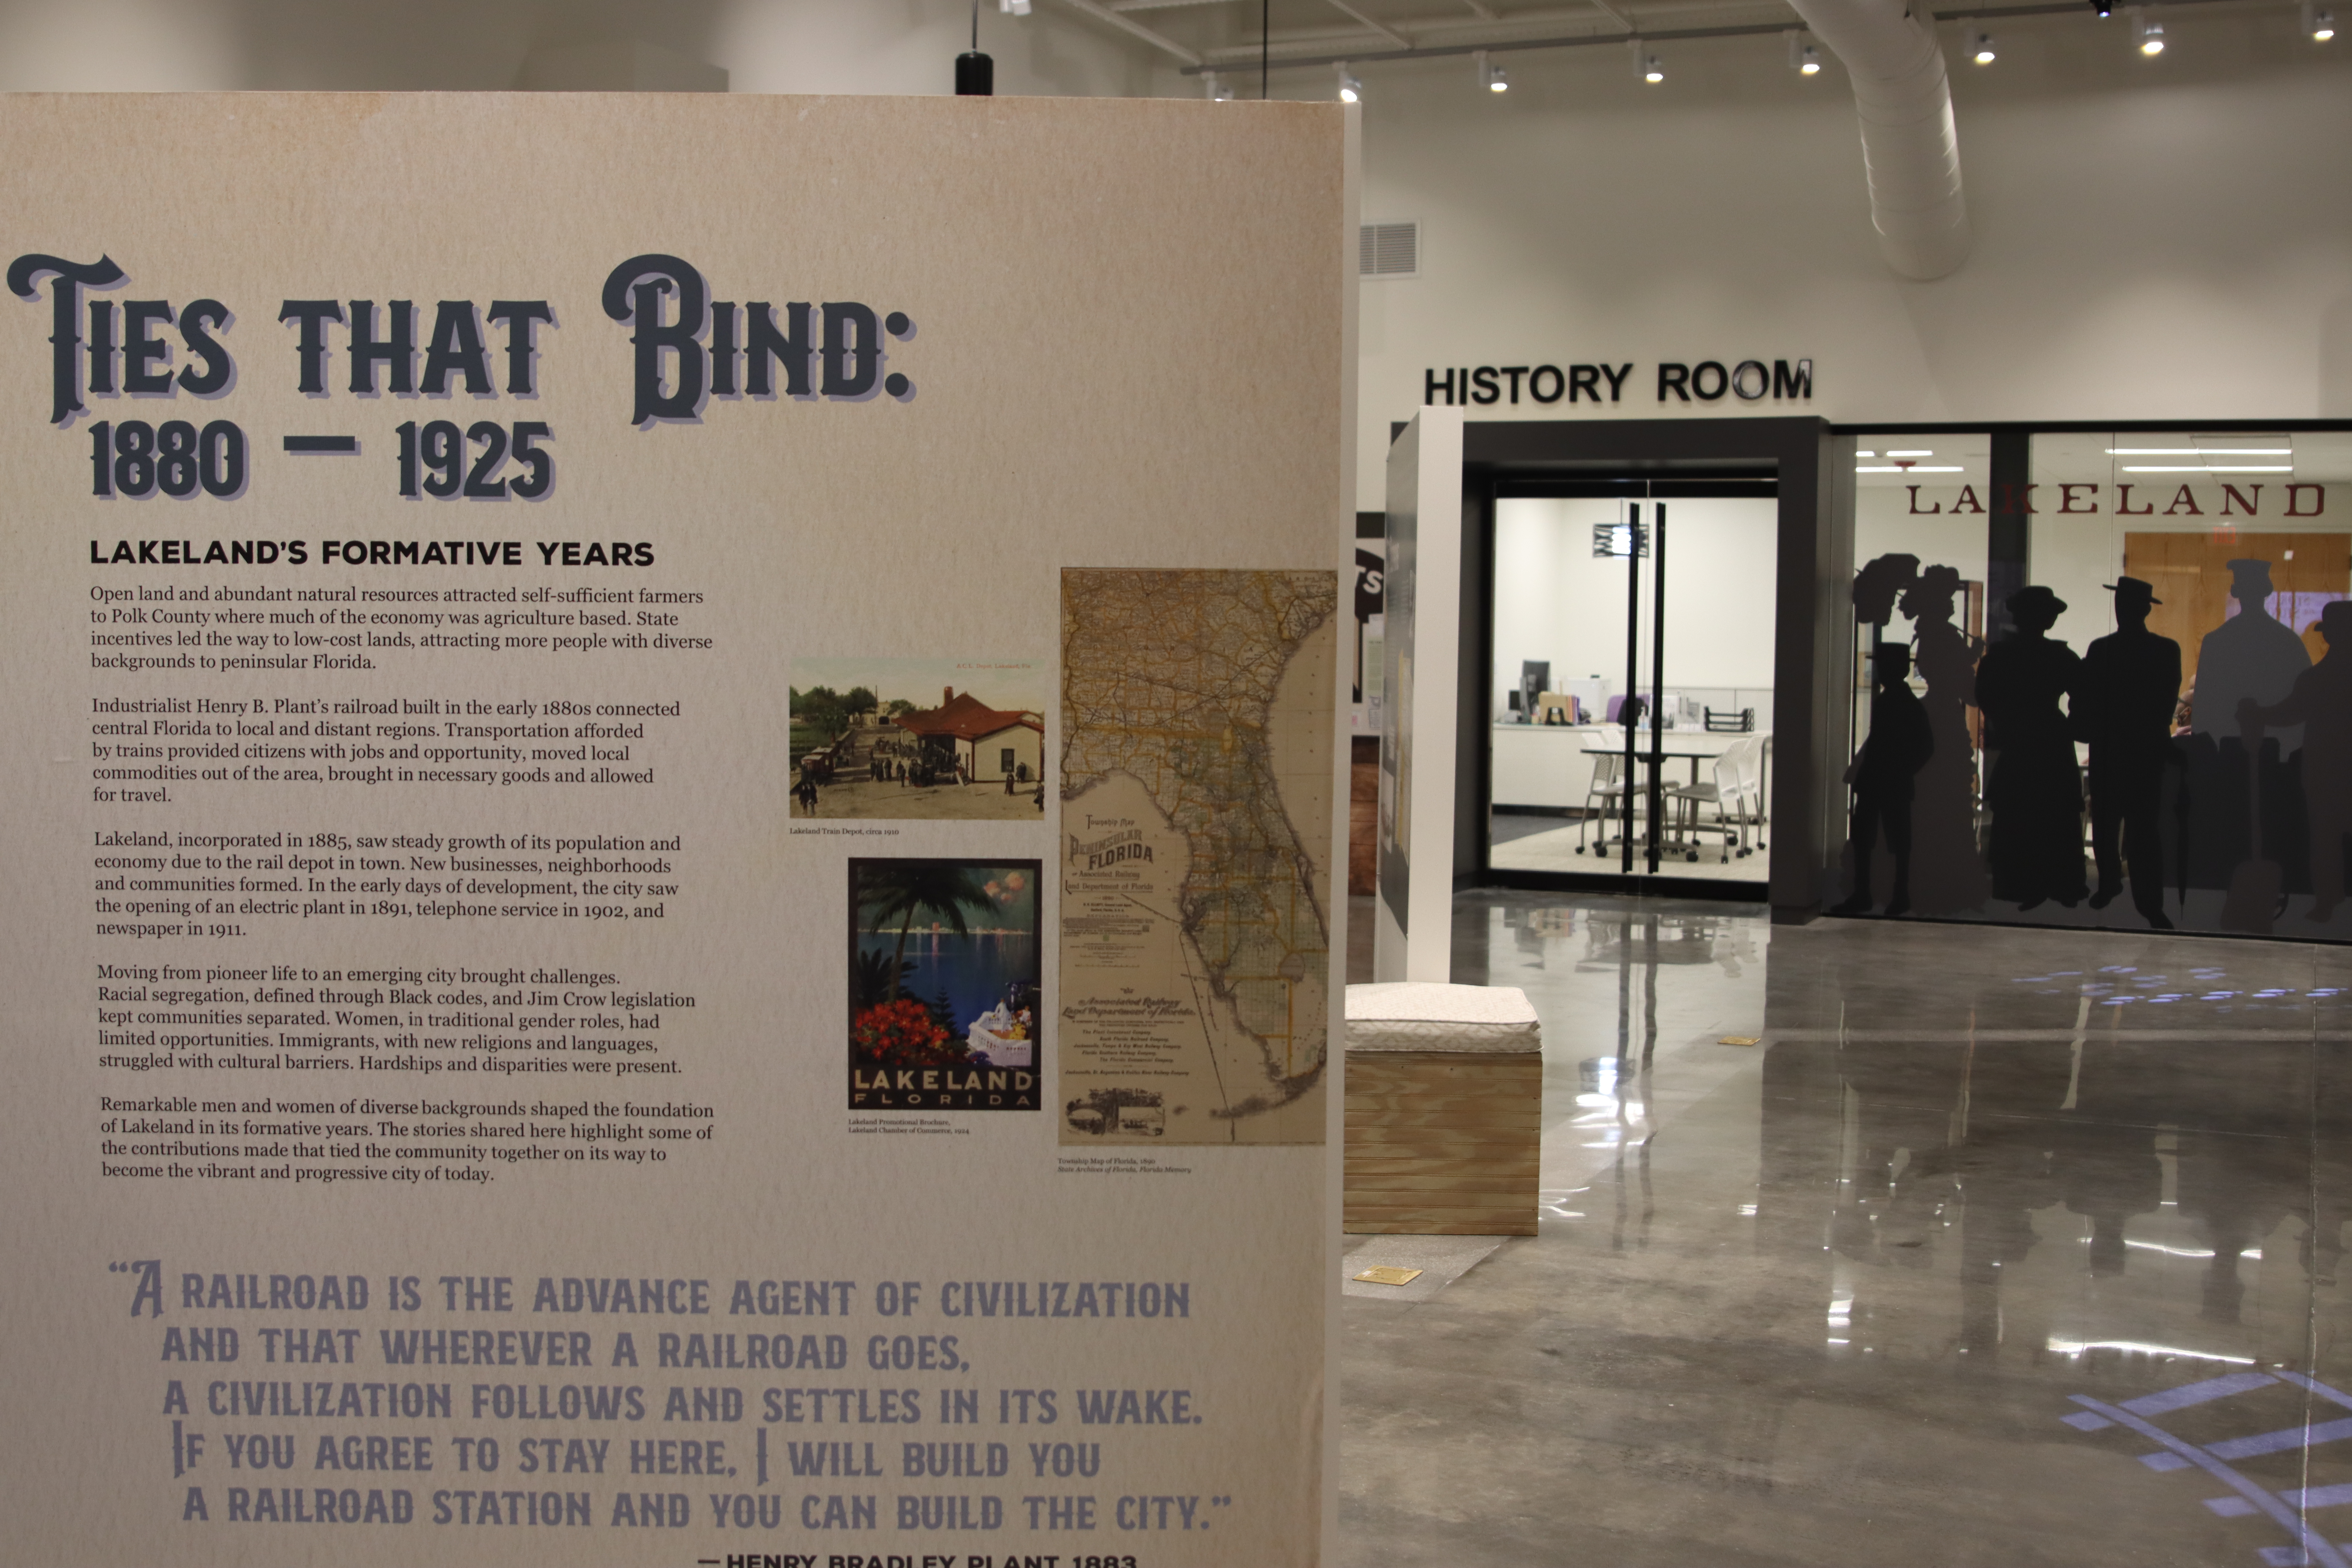 View into Lakeland History and Culture Center exhibit with "Ties that Bind" information panel in foreground and "History Room" door in background